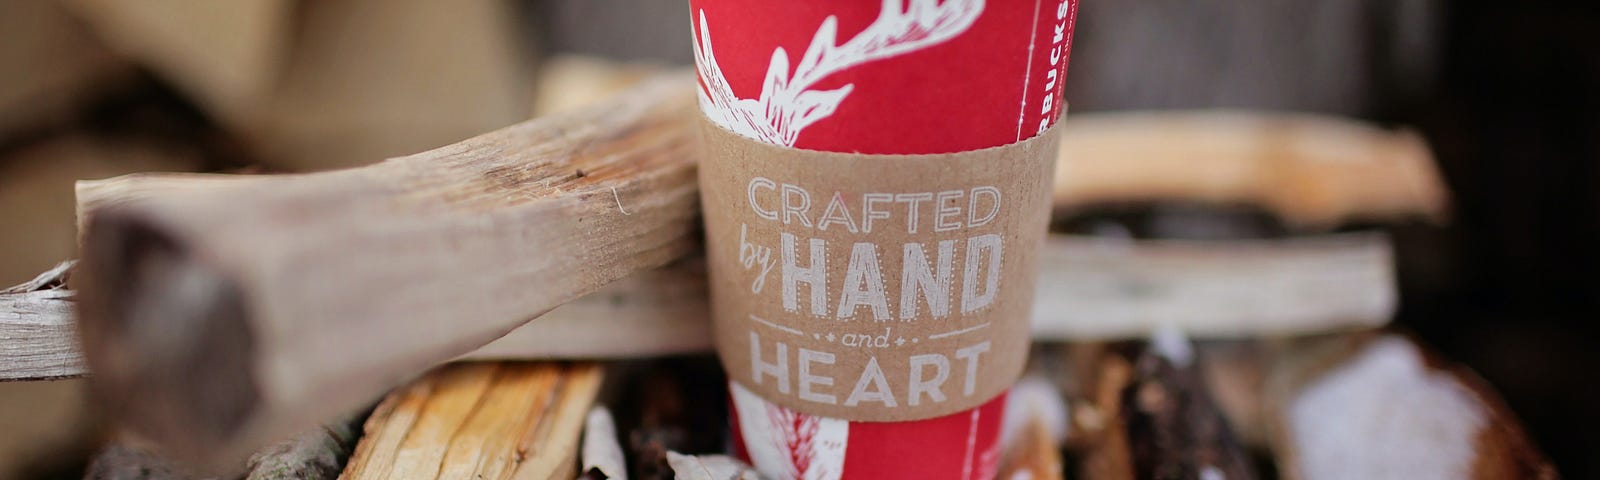 A red Starbucks cup sits on snowy branches. The coffee sleeve reads “Crafted by Hand and Heart.”